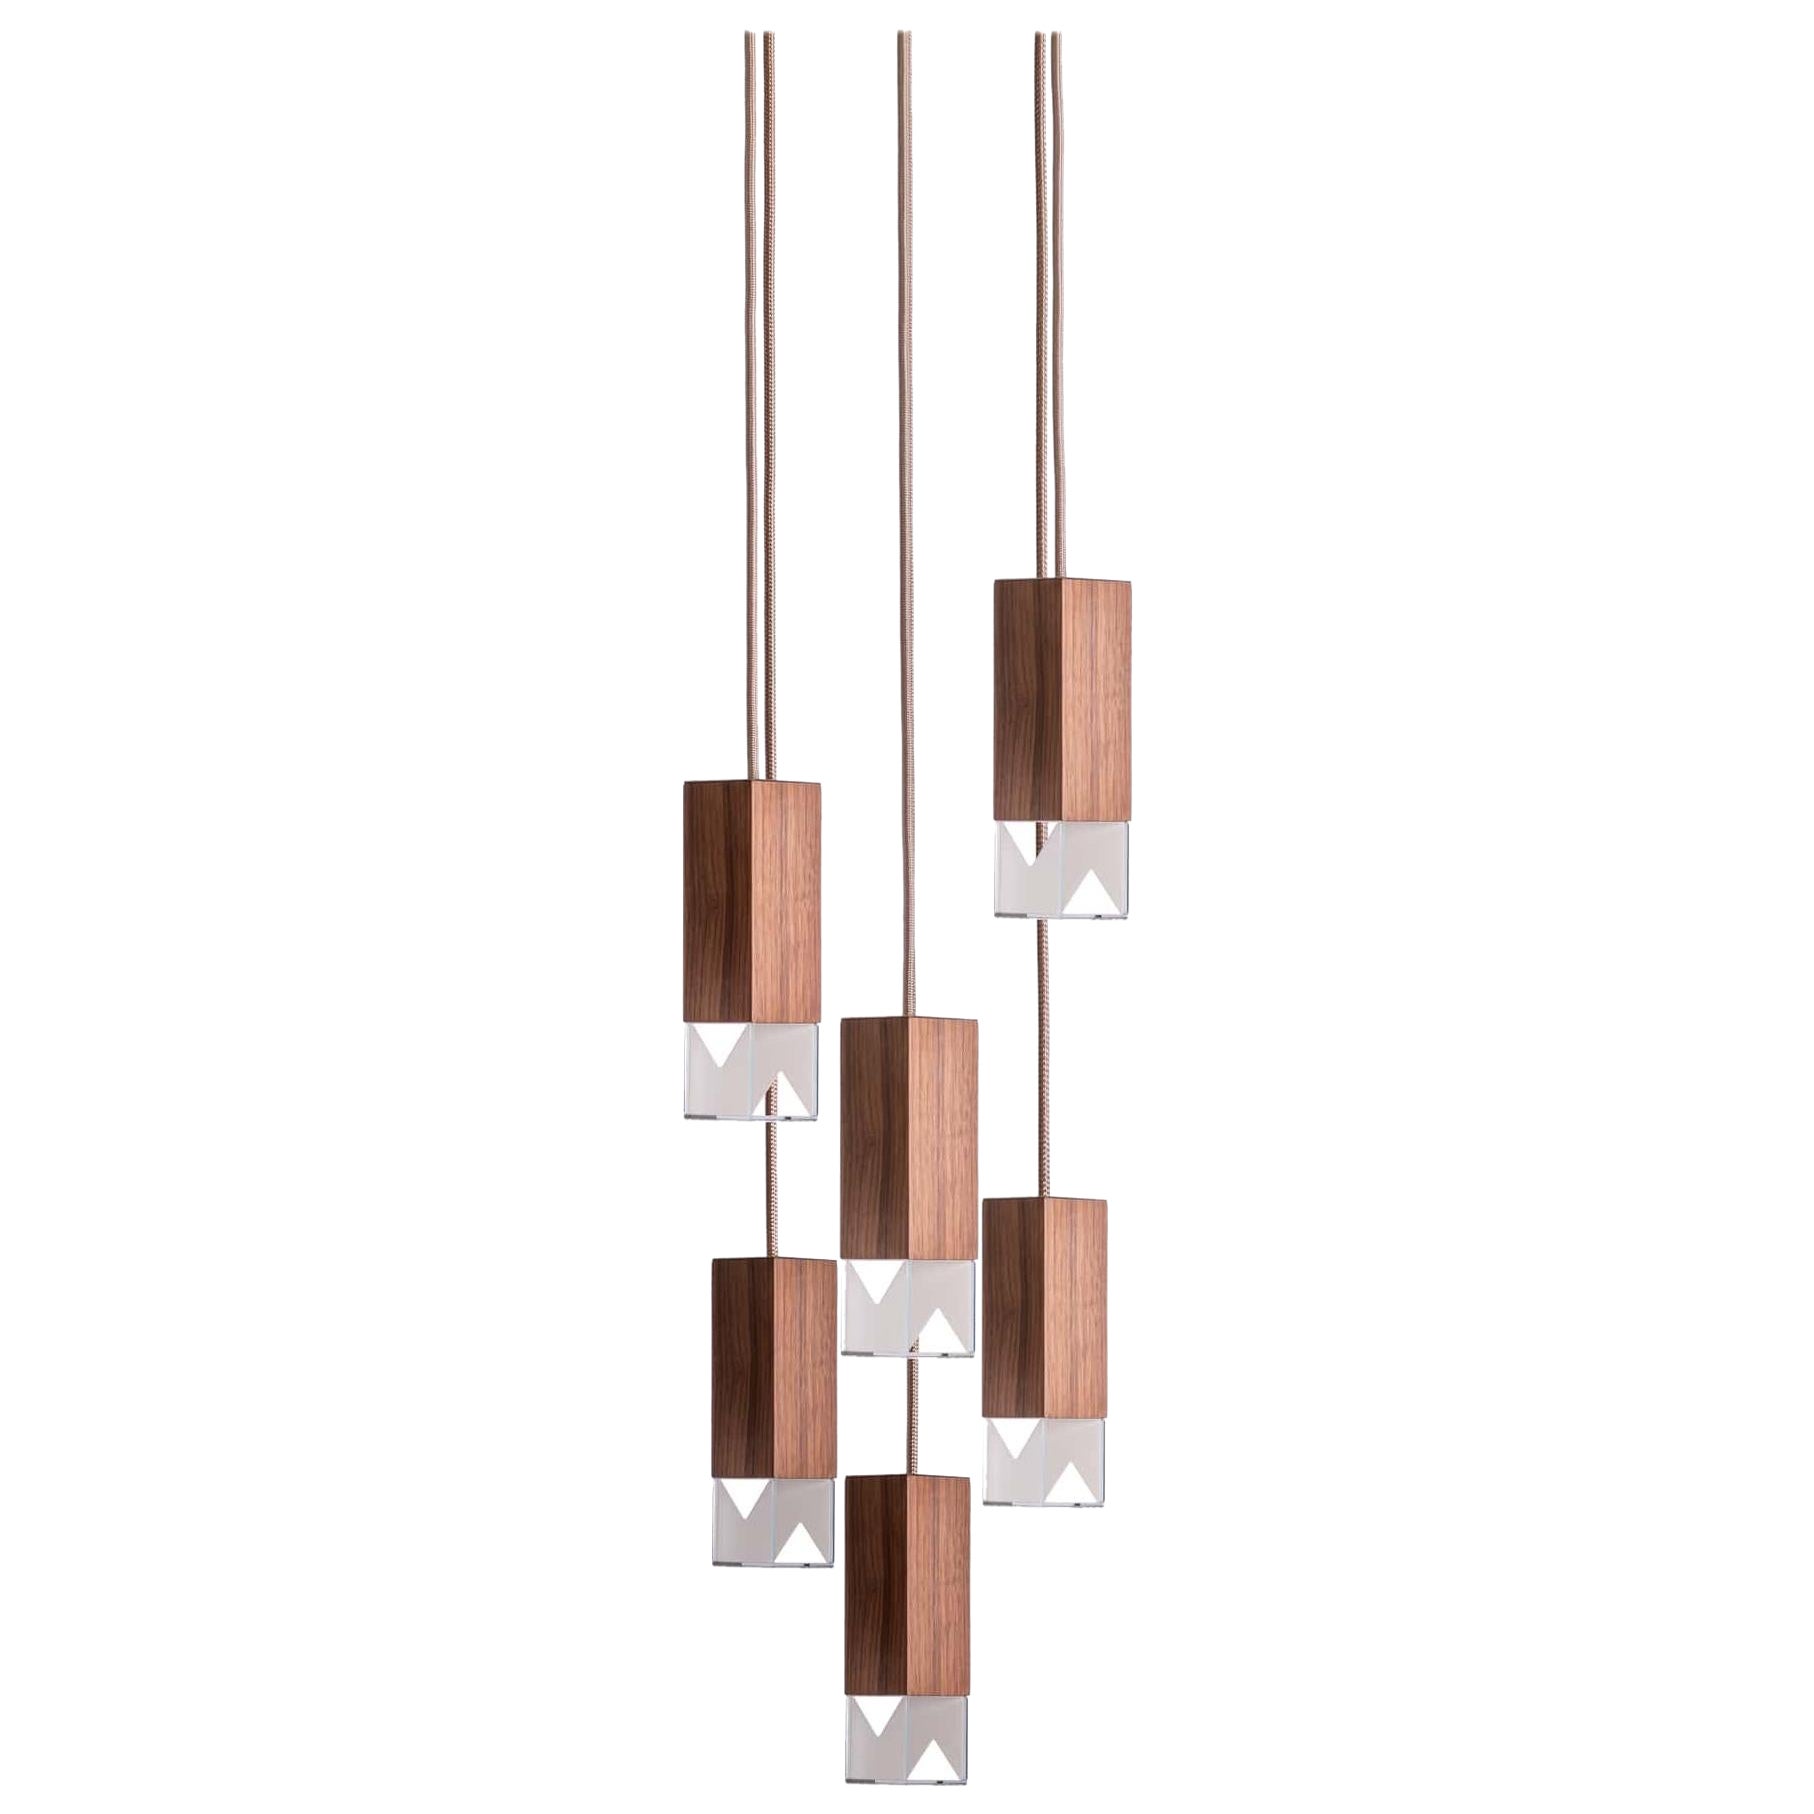 Lamp One 6-Light Chandelier in Walnut by Formaminima For Sale